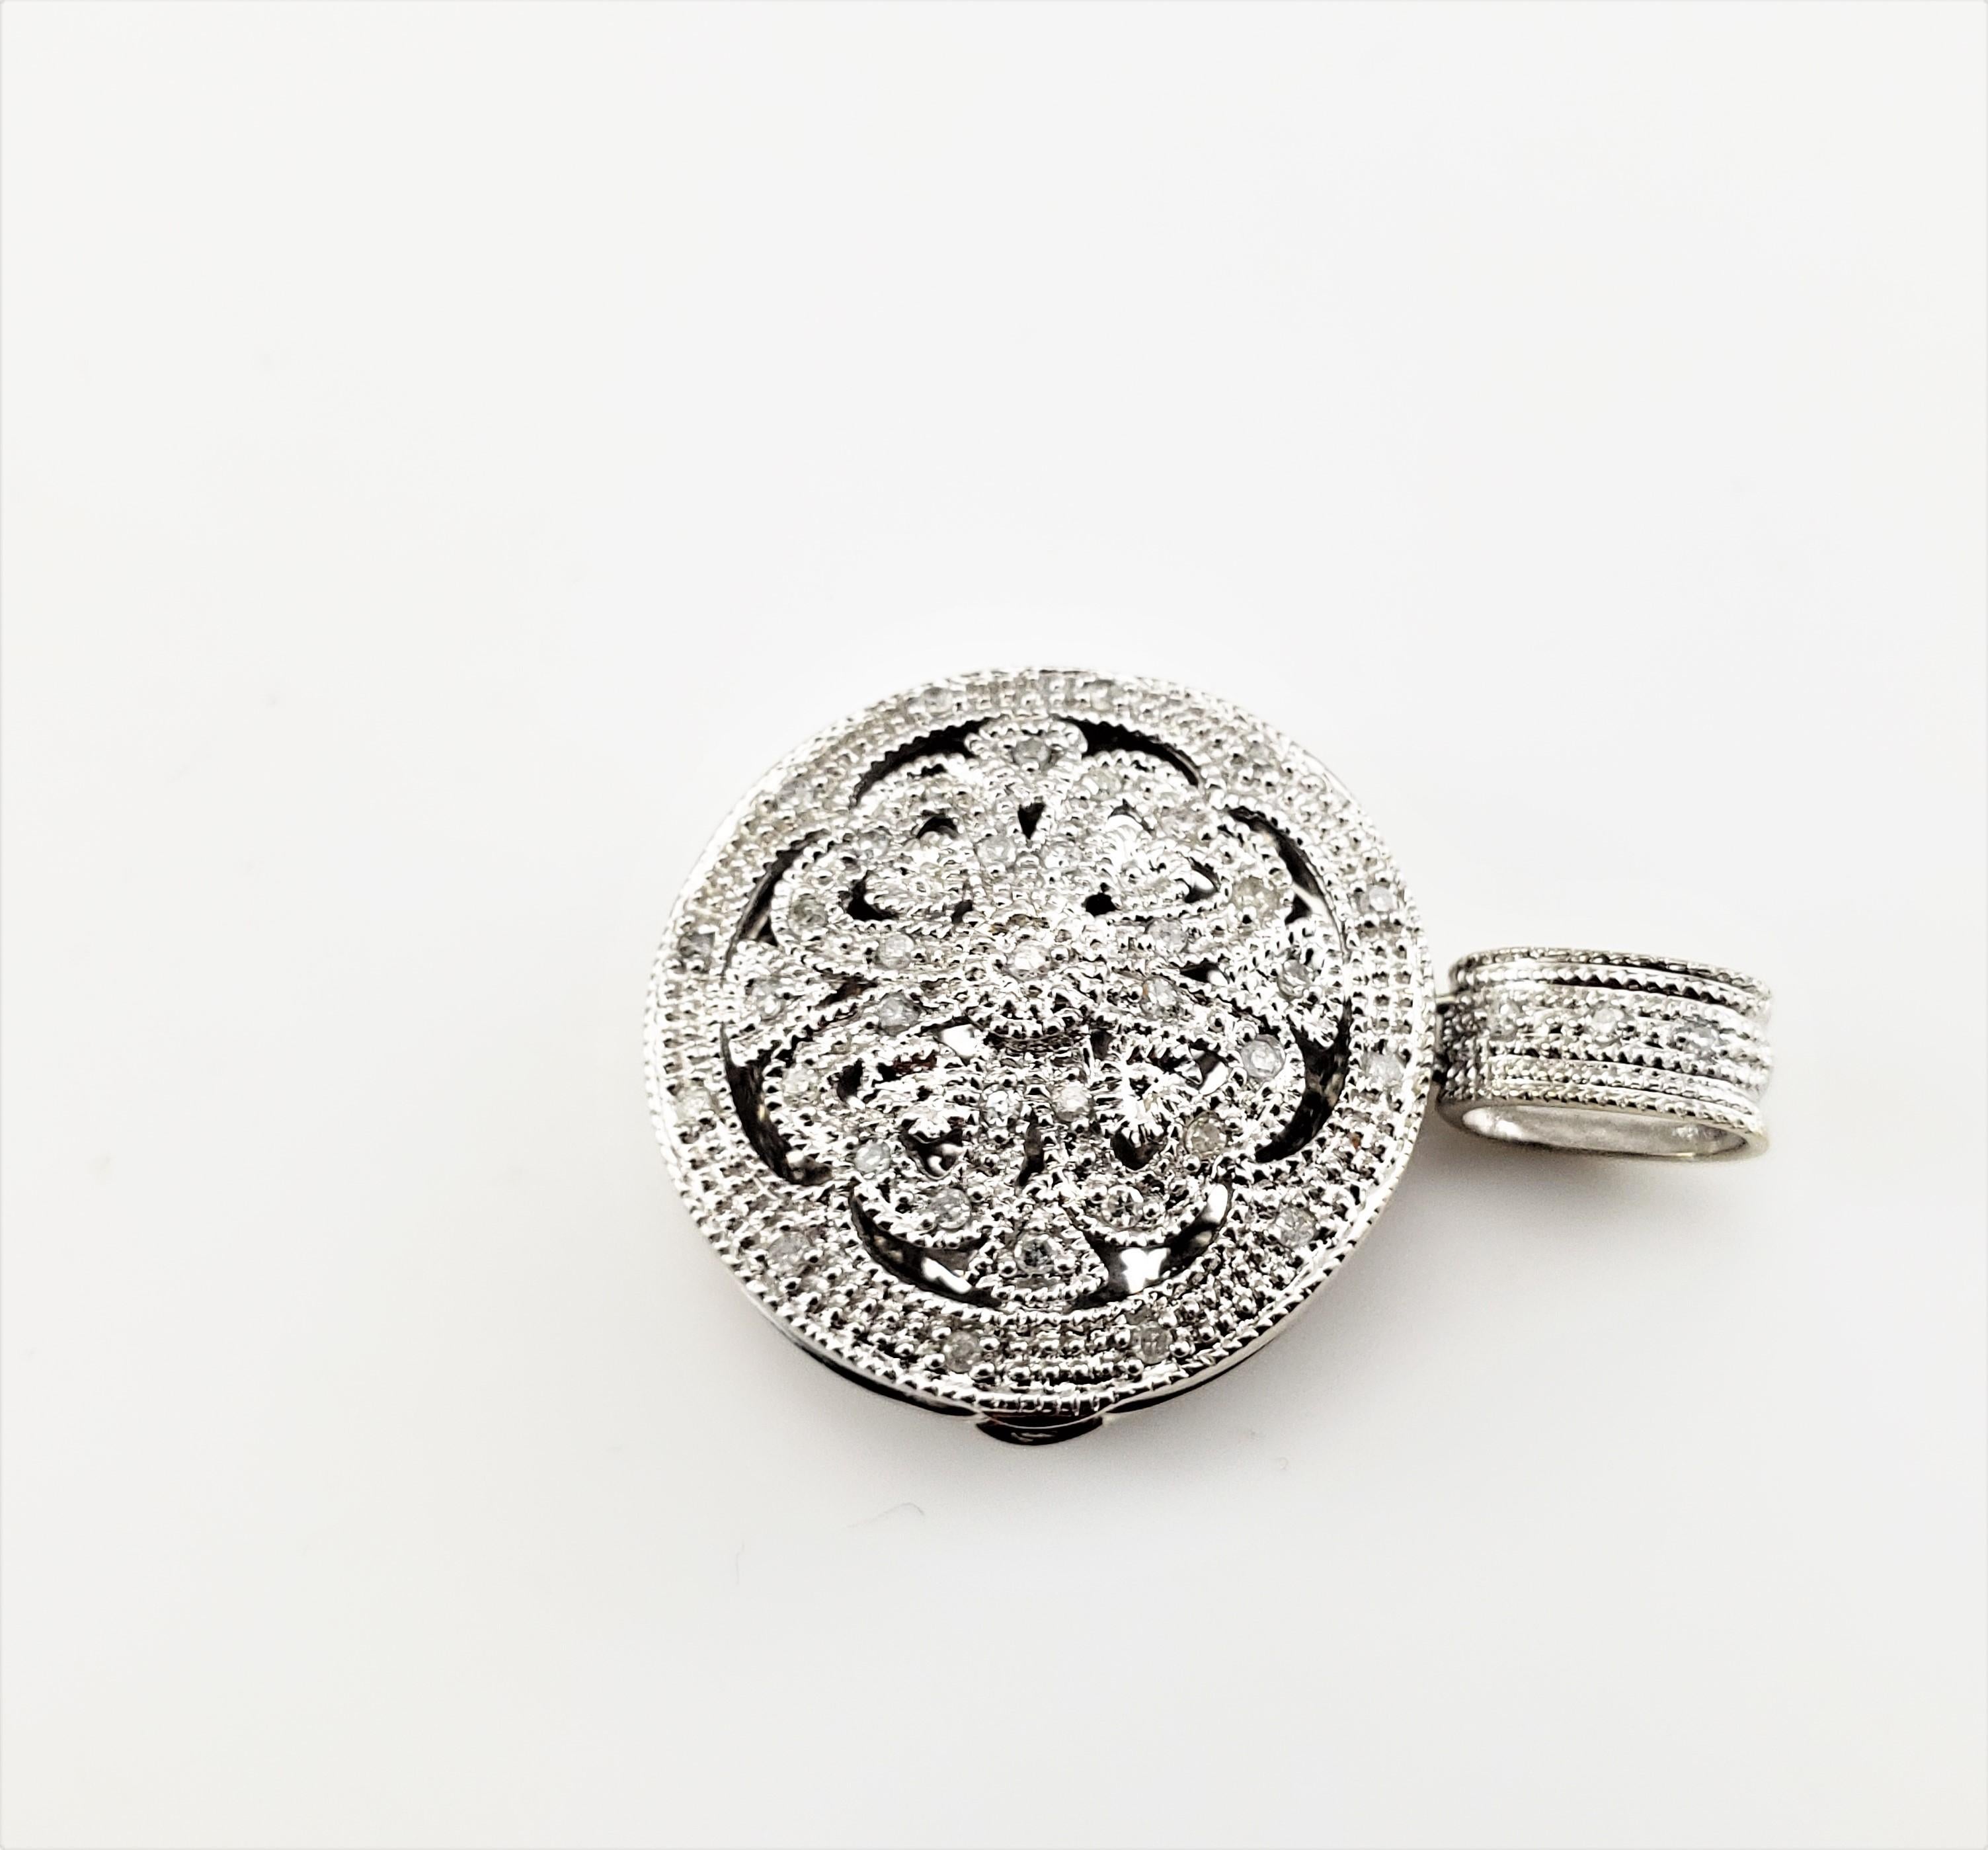 Vintage 14 Karat White Gold and Diamond Locket Pendant-

This lovely 14K white gold pendant features 40 round single cut diamonds set in a stunning floral design.

Approximate total diamond weight: .20 ct.

Diamond color: I

Diamond clarity: